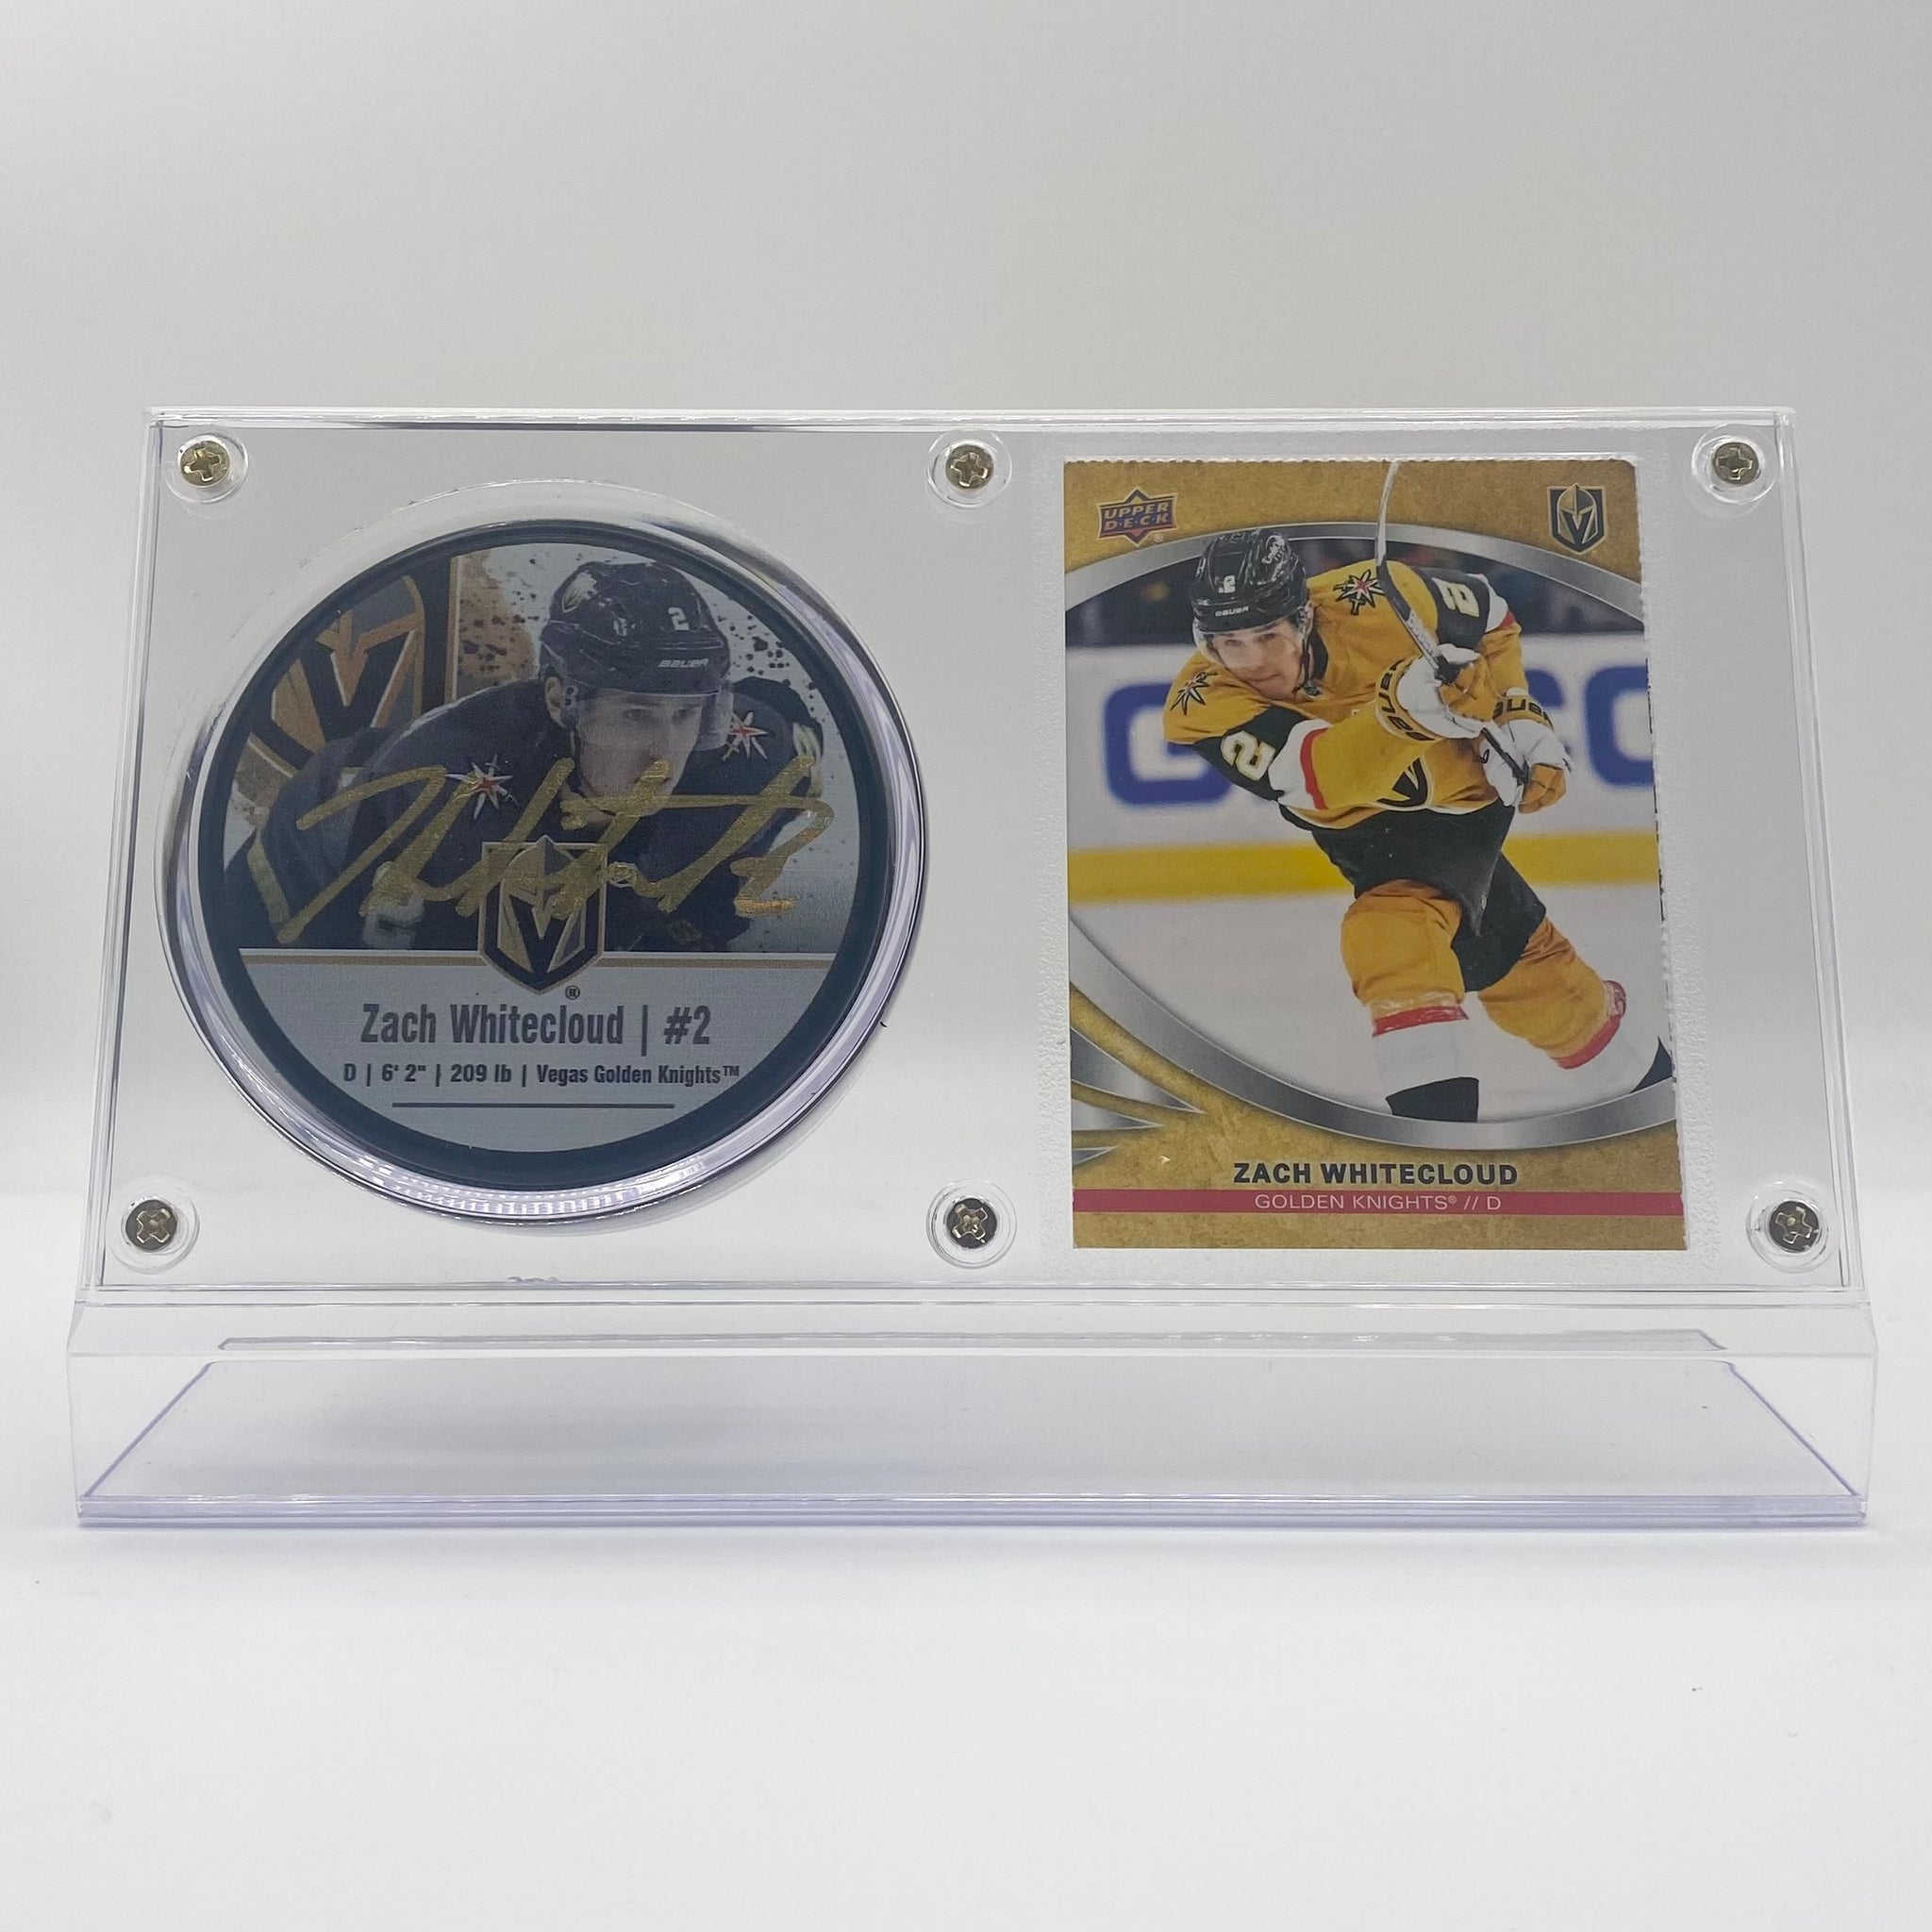 Zach Whitecloud Vegas Golden Knights Autographed Hockey Puck and Trading Card Case